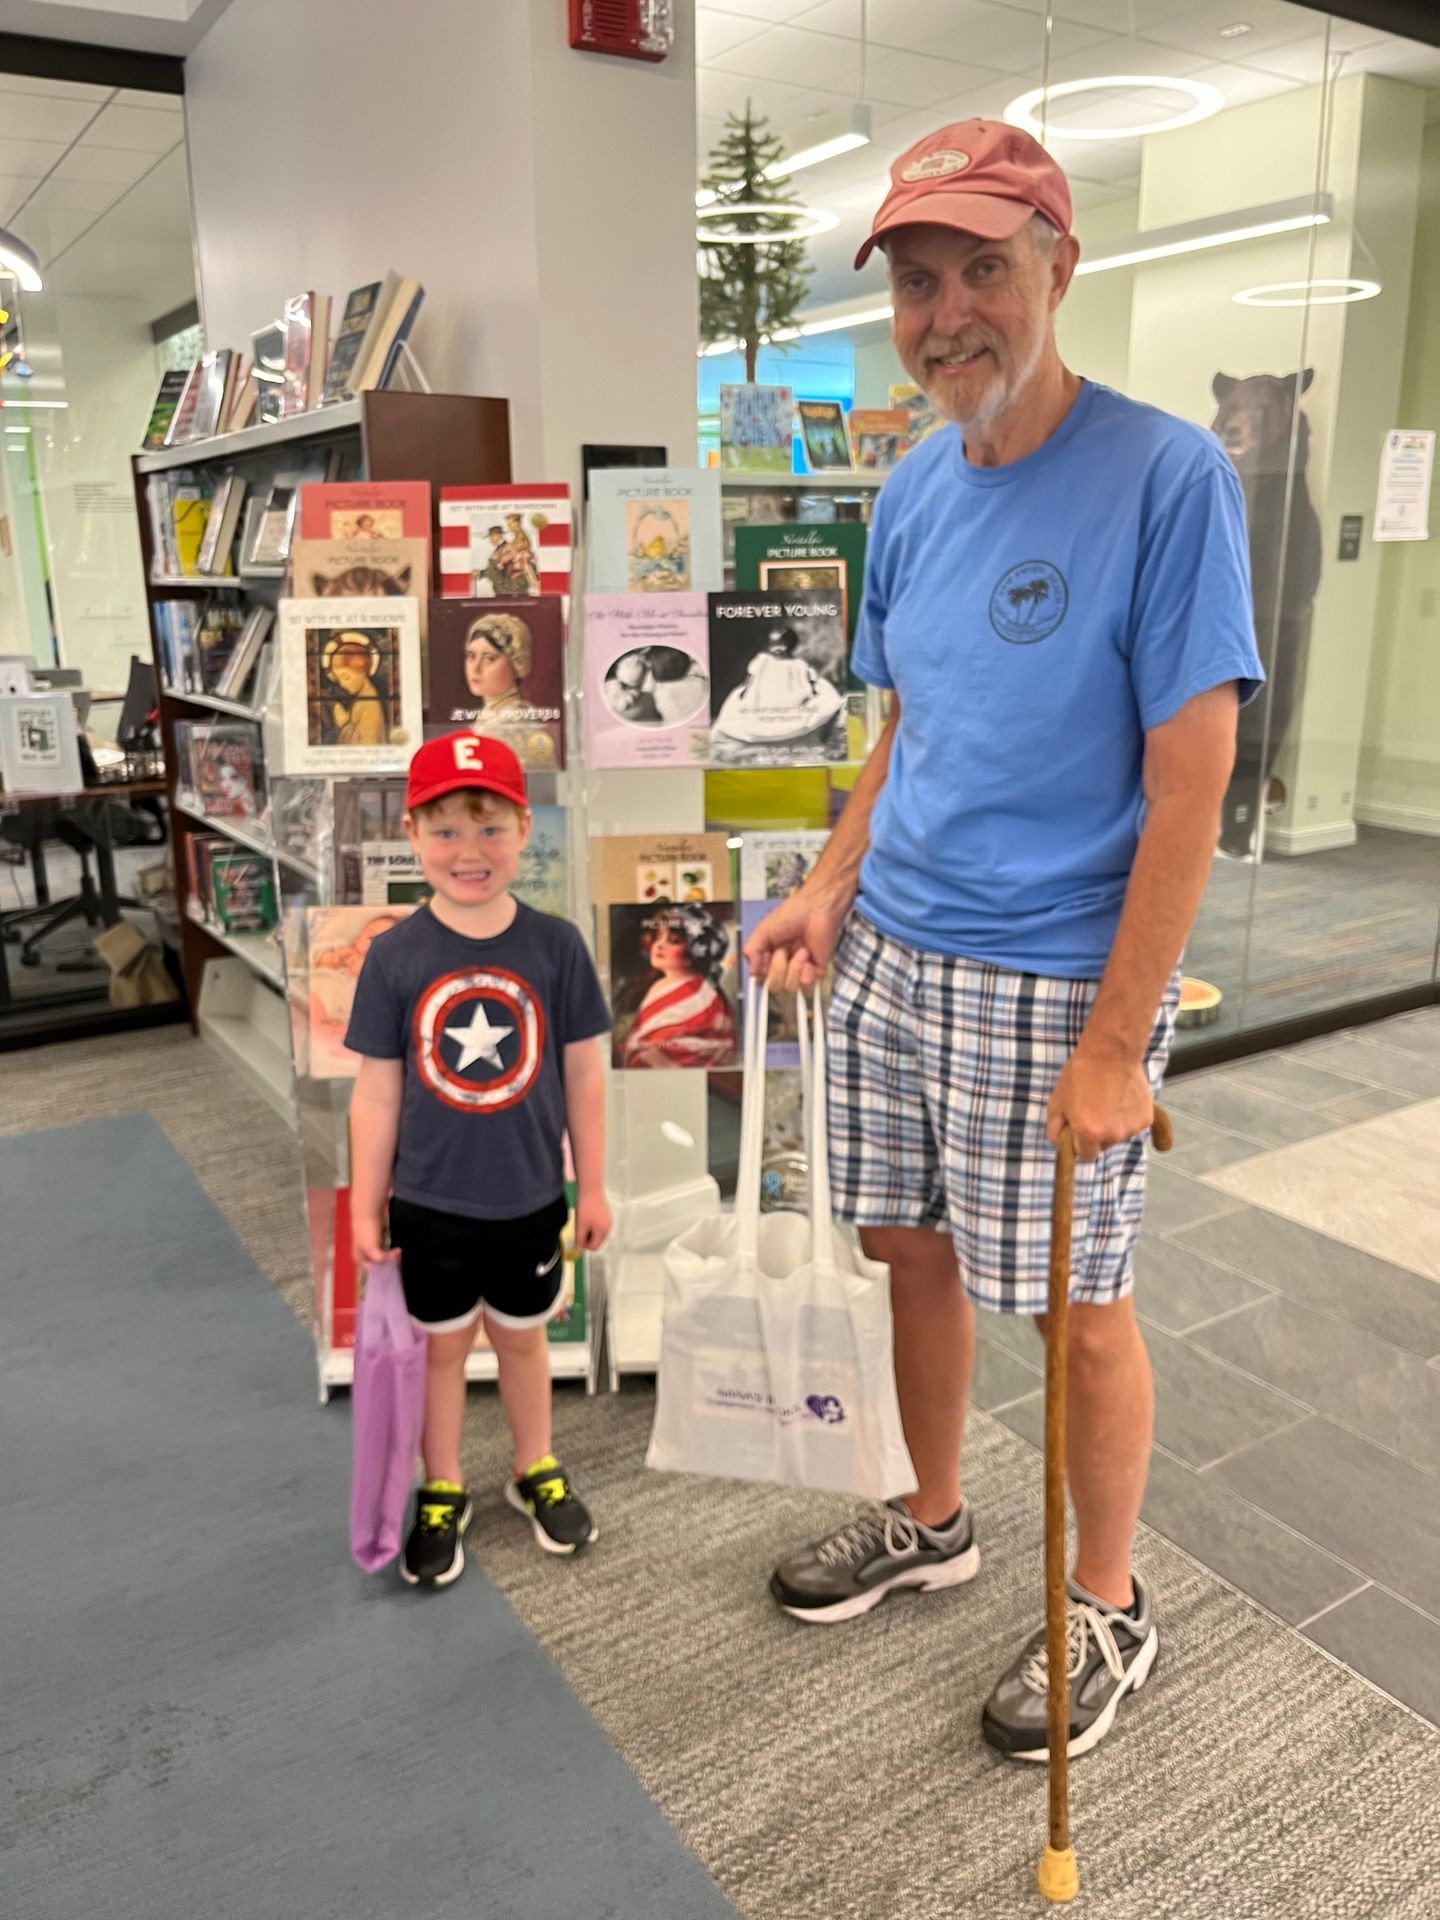 A man in plaid shorts and a baseball hat holds a cane and a tote bag filled with NANA’S BOOKS designed to meet the needs of people living with dementia. He stands alongside his grandson who holds a lavender tote bag of NANA’S BOOKS, as well, as they check out of the library together.